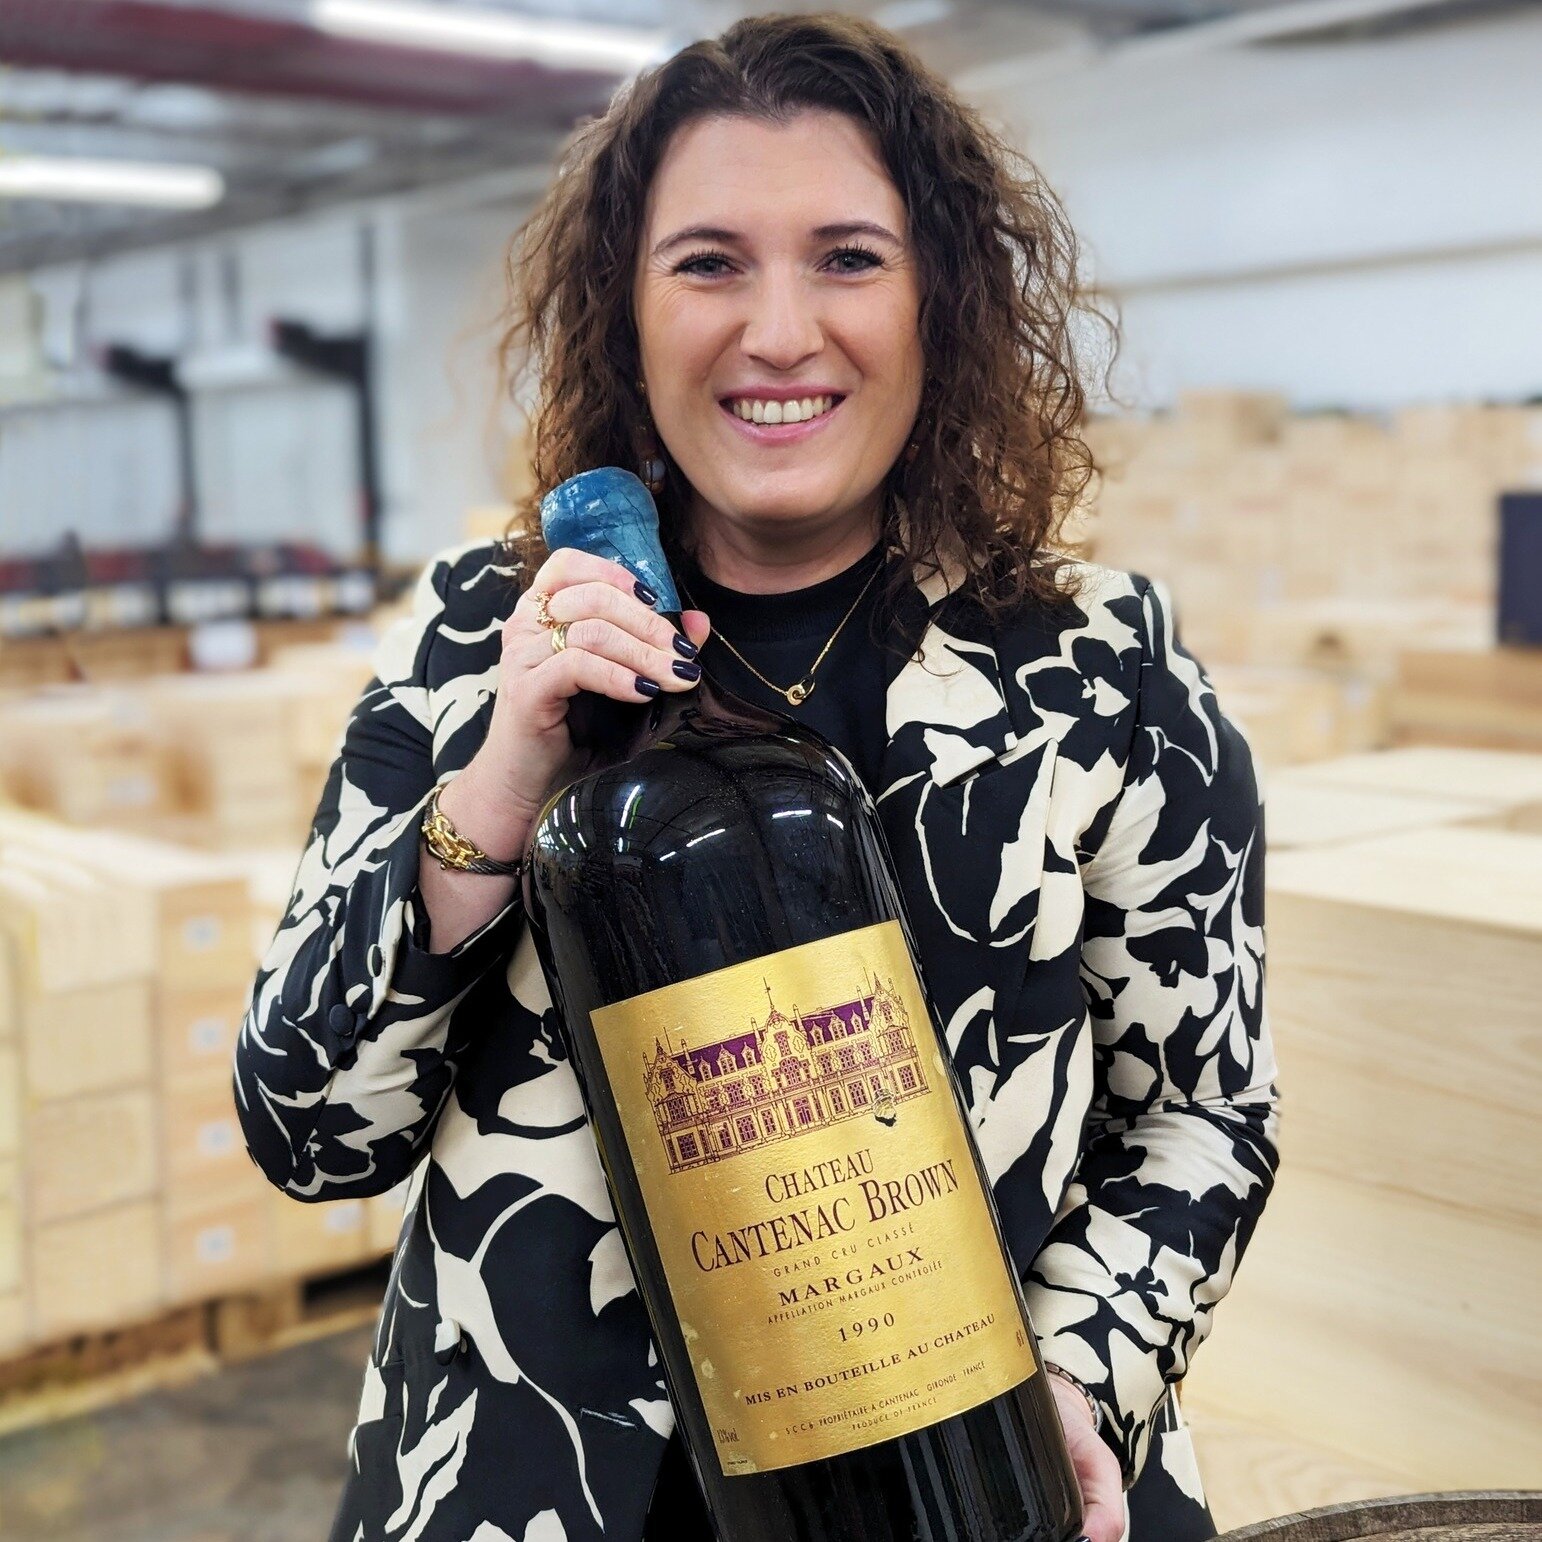 A warm welcome to Pauline Fradin and the wines of Ch&acirc;teau Cantenac Brown! During our tasting here at MISA HQ, we were able to savor 2 vintages of their Grand Vin, as well as BriO de Cantenac Brown and Alto de Cantenac Brown.

In Ch&acirc;teau C